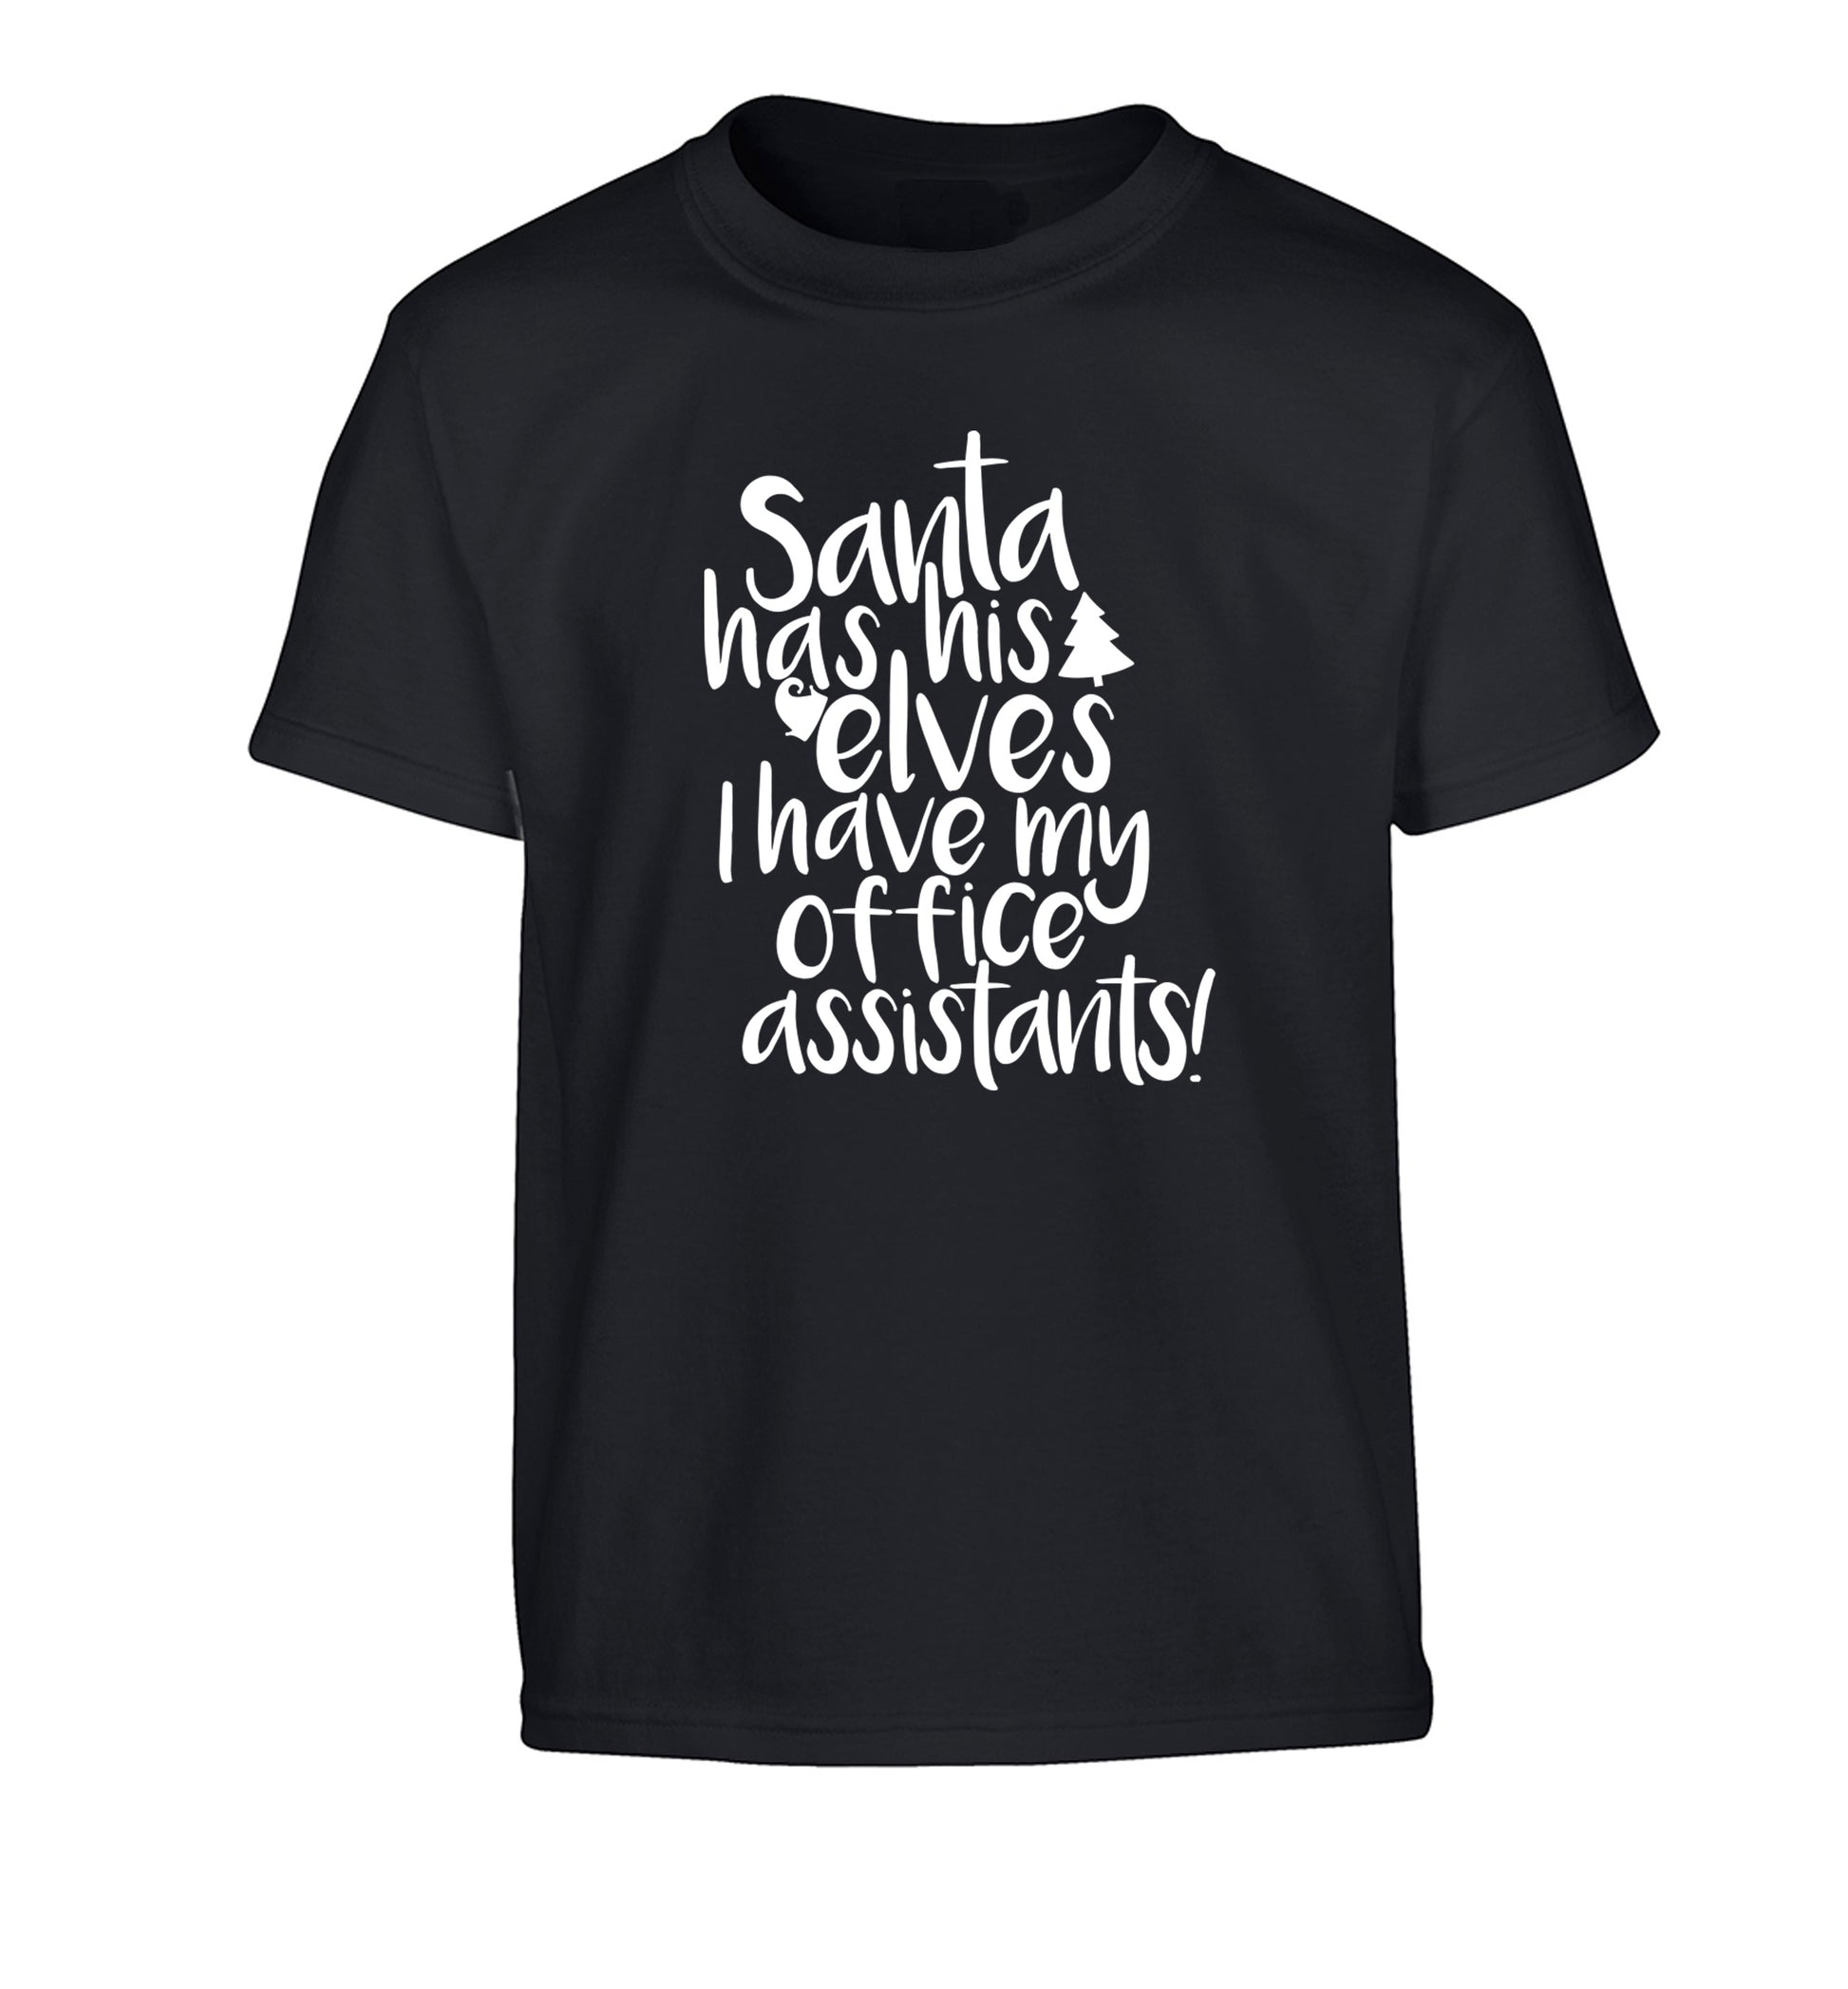 Santa has his elves I have my office assistants Children's black Tshirt 12-14 Years